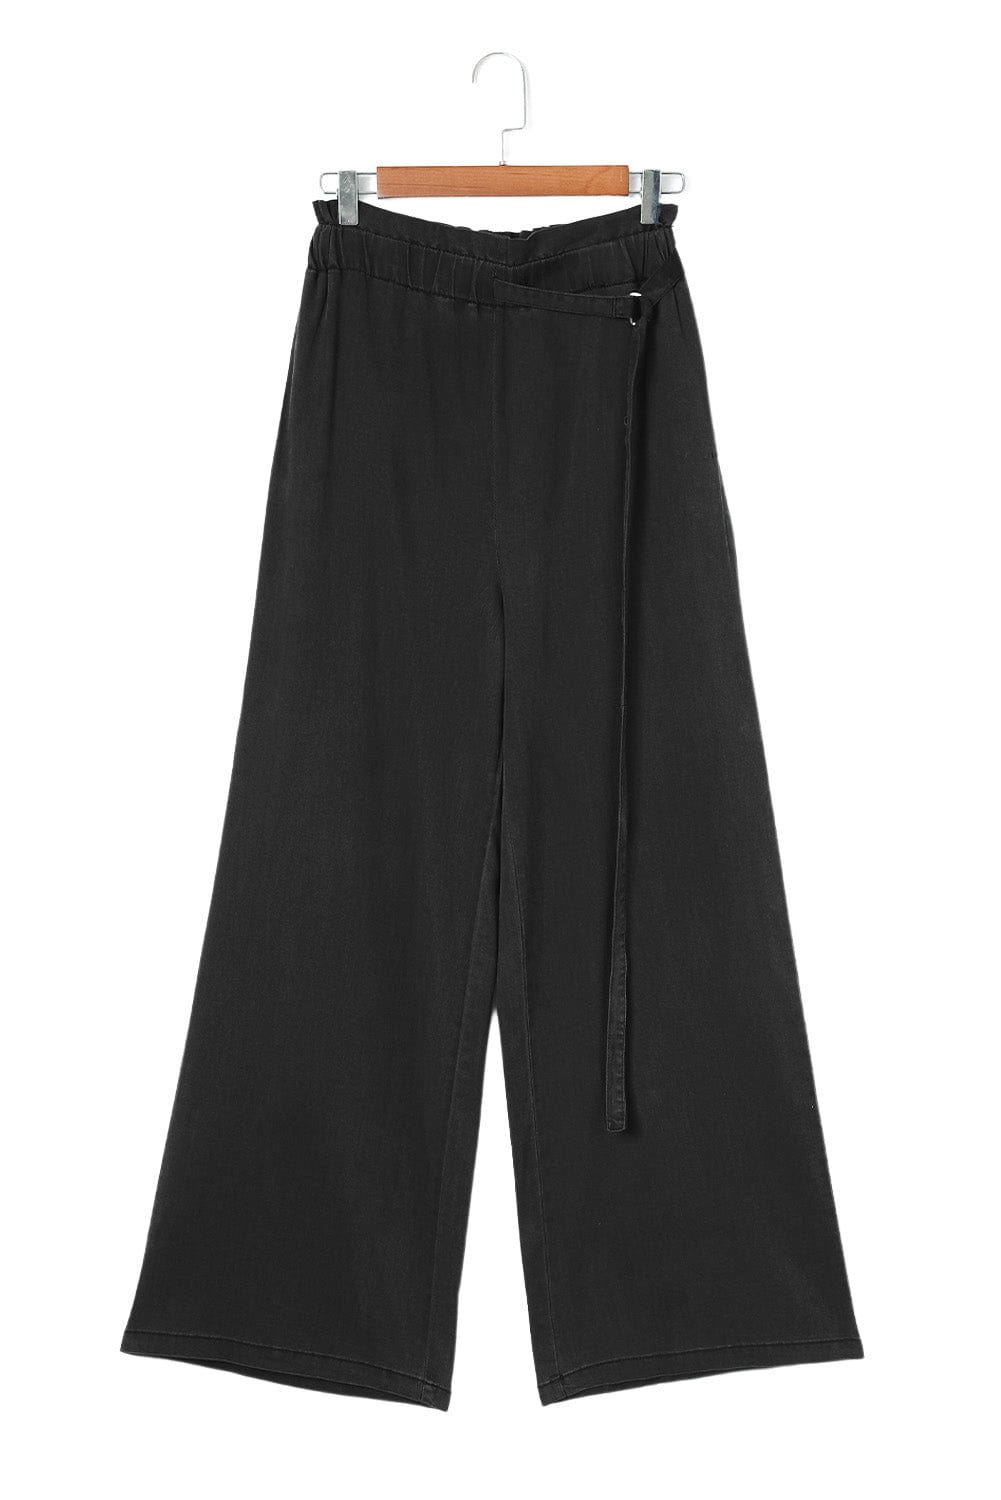 The802Gypsy  Bottoms Black High Waist Pocketed Wide Leg Tencel Jeans